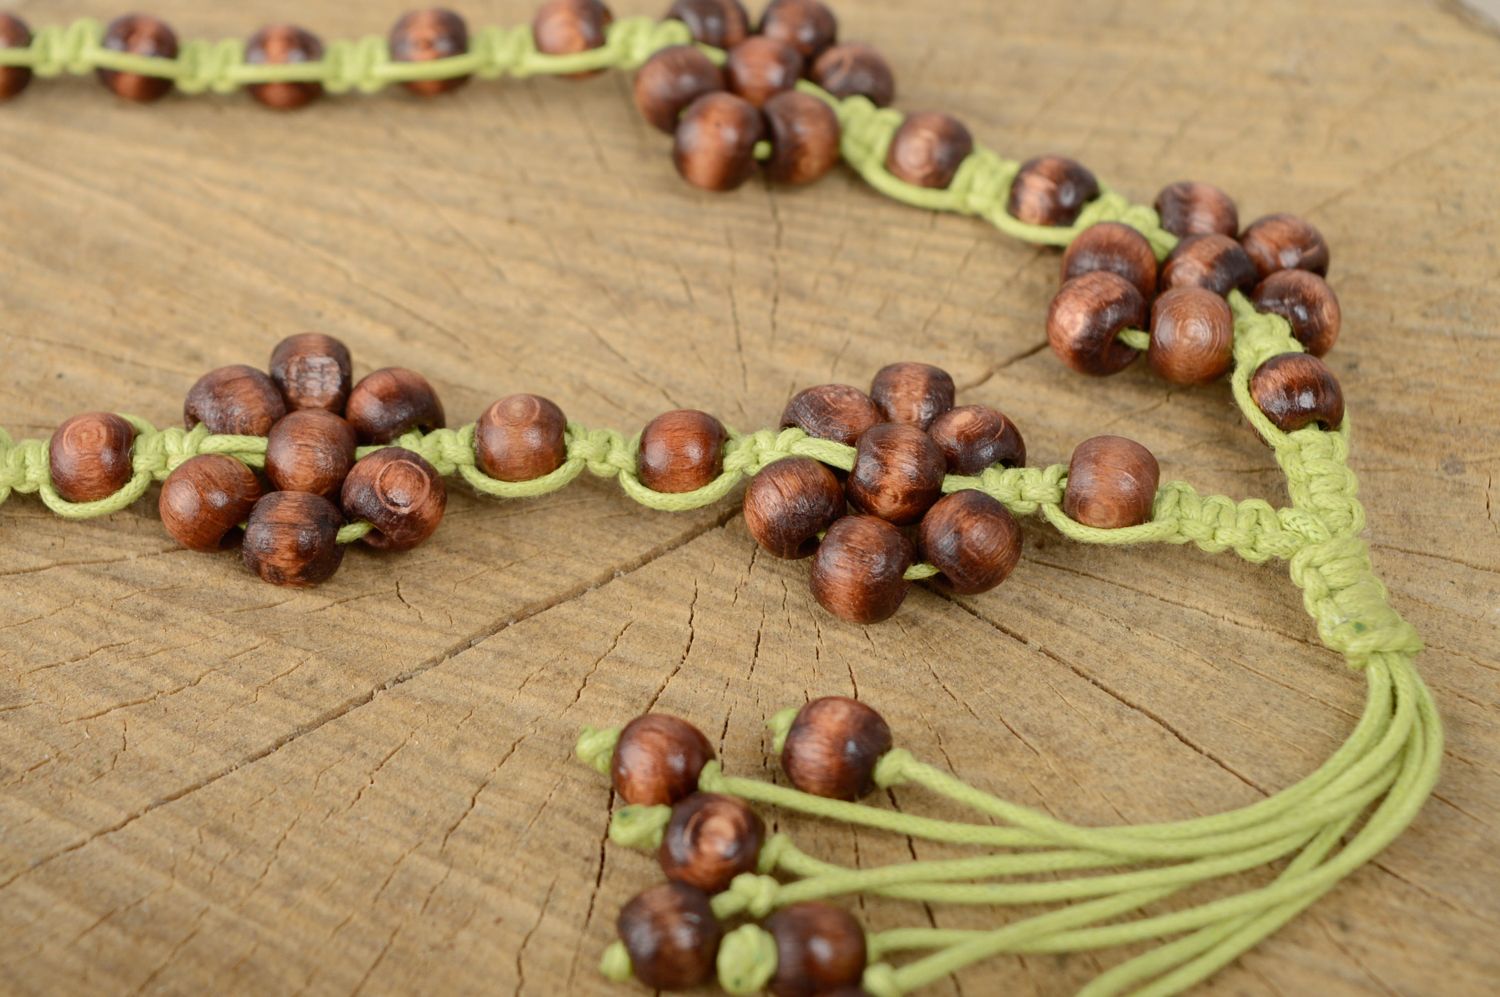 Macrame necklace with wooden beads photo 2